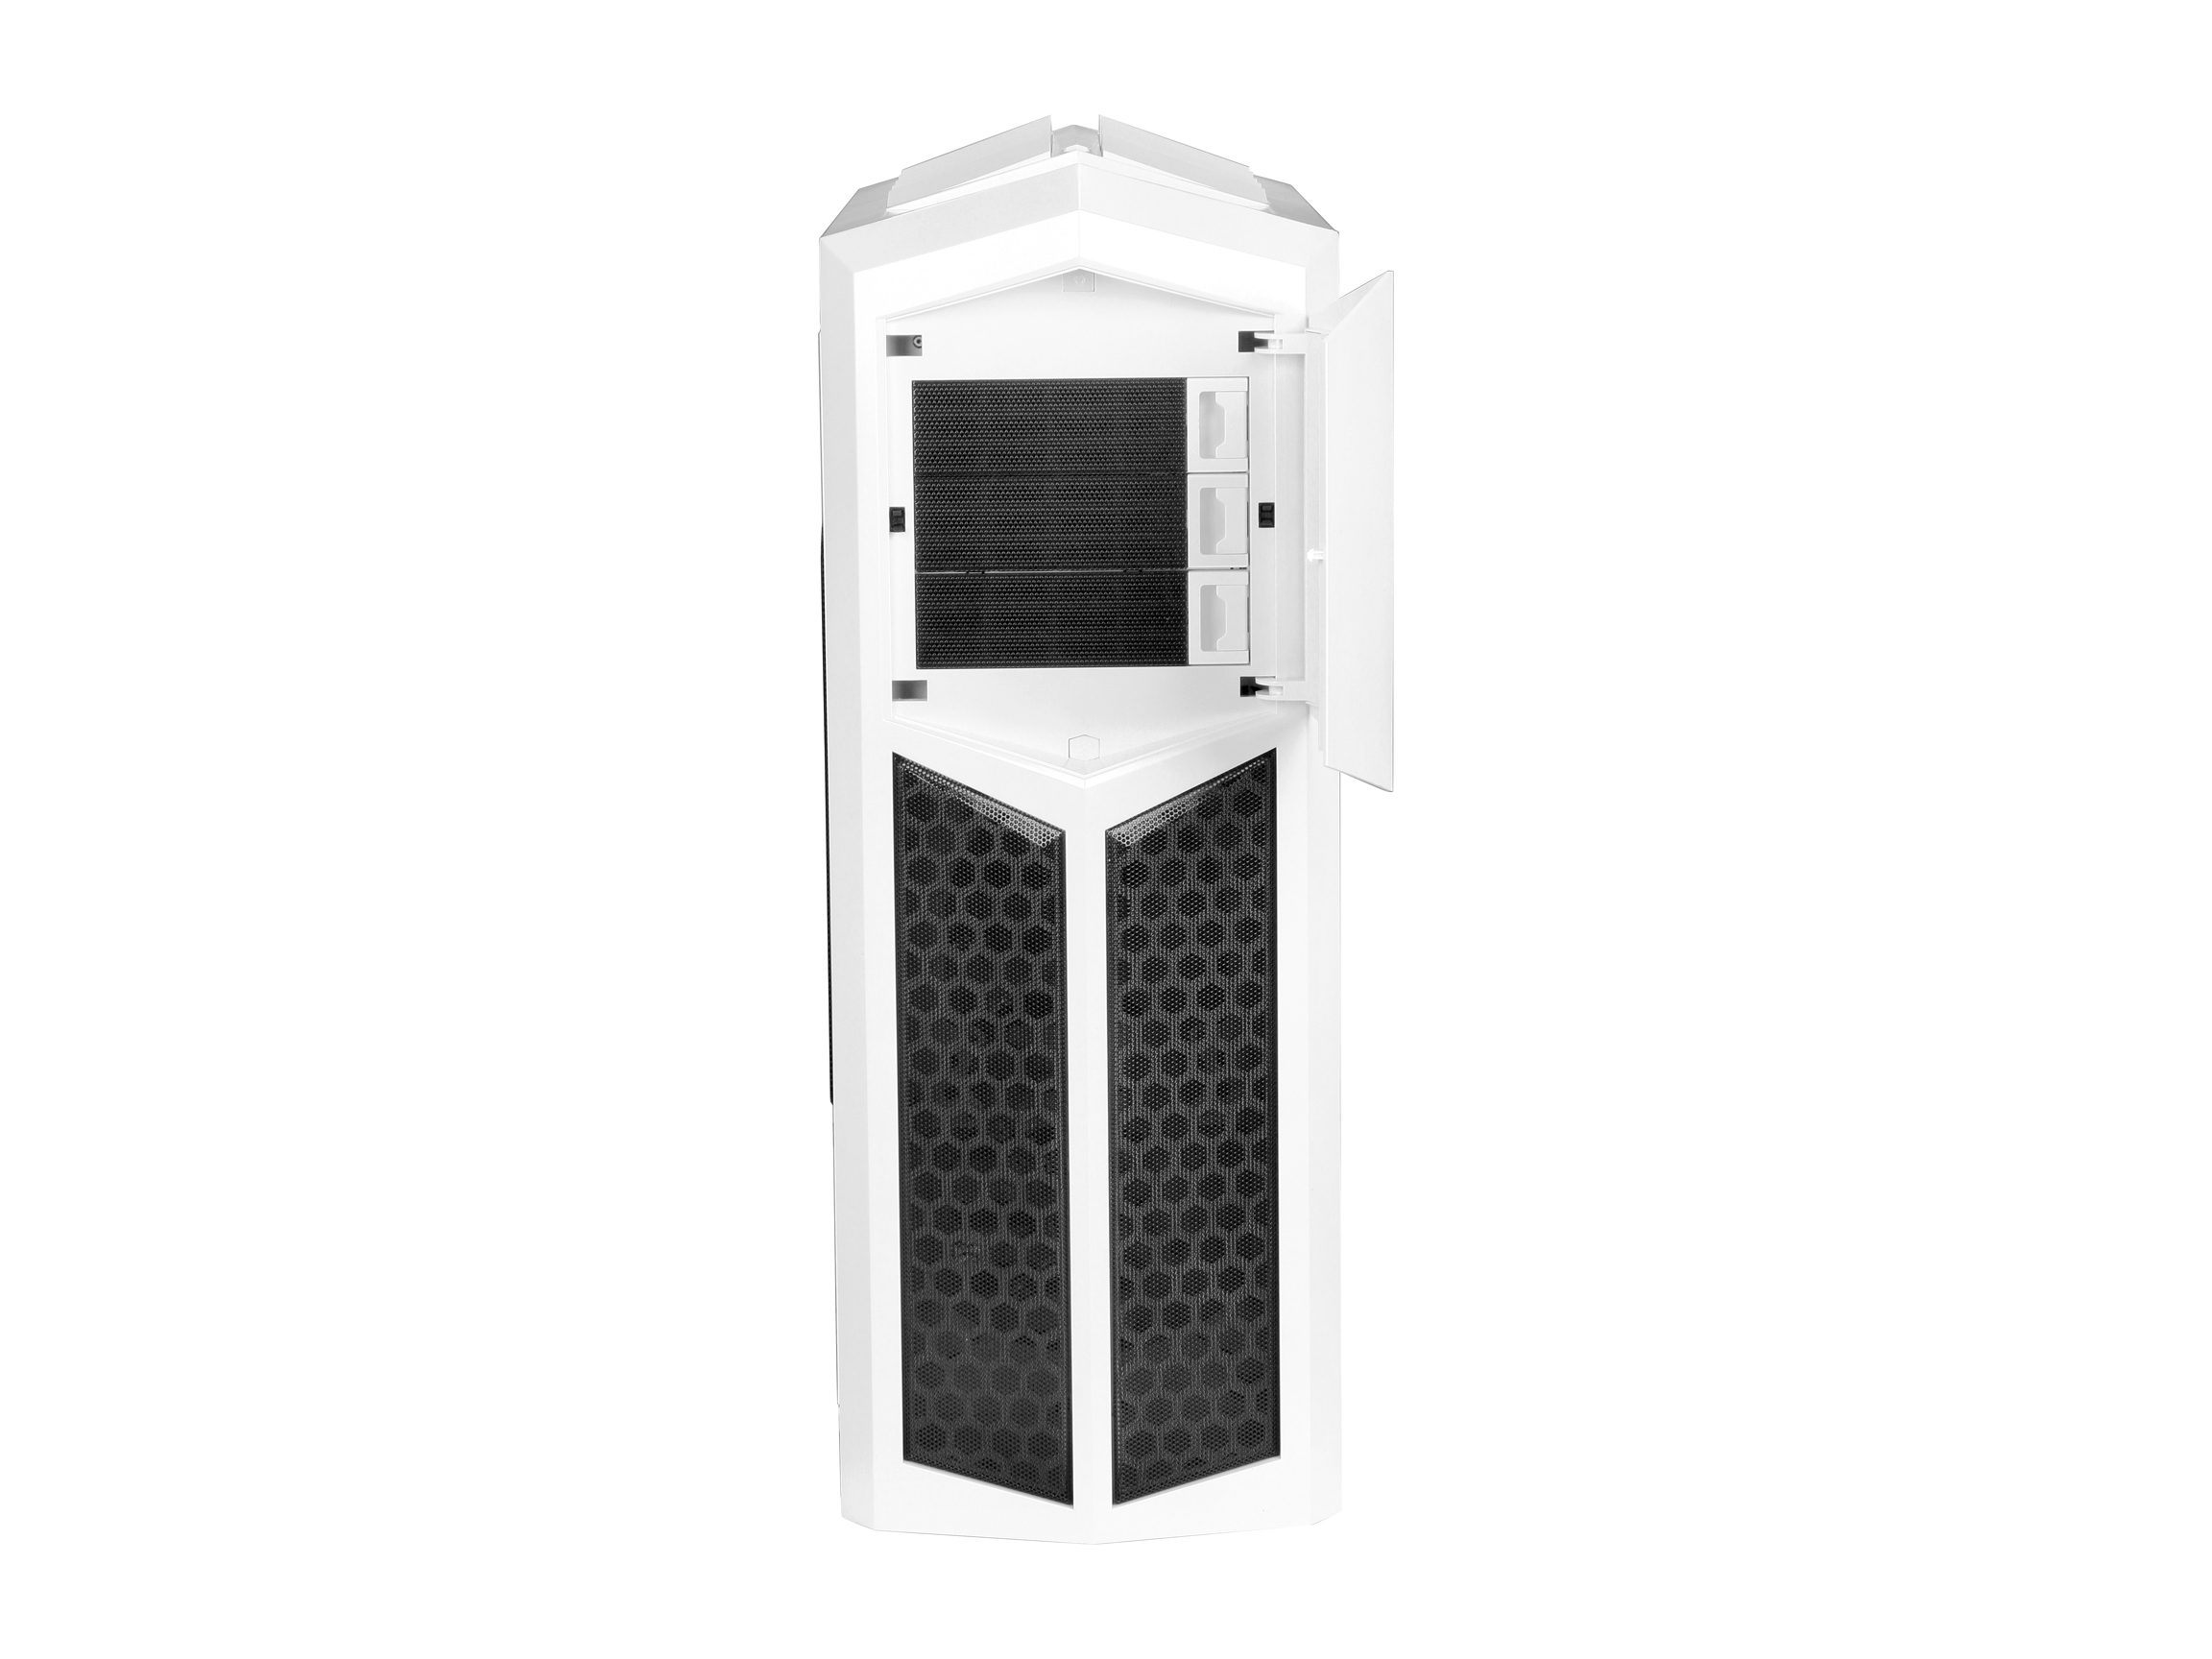 Rosewill Throne w Gaming ATX Full Tower Computer Case